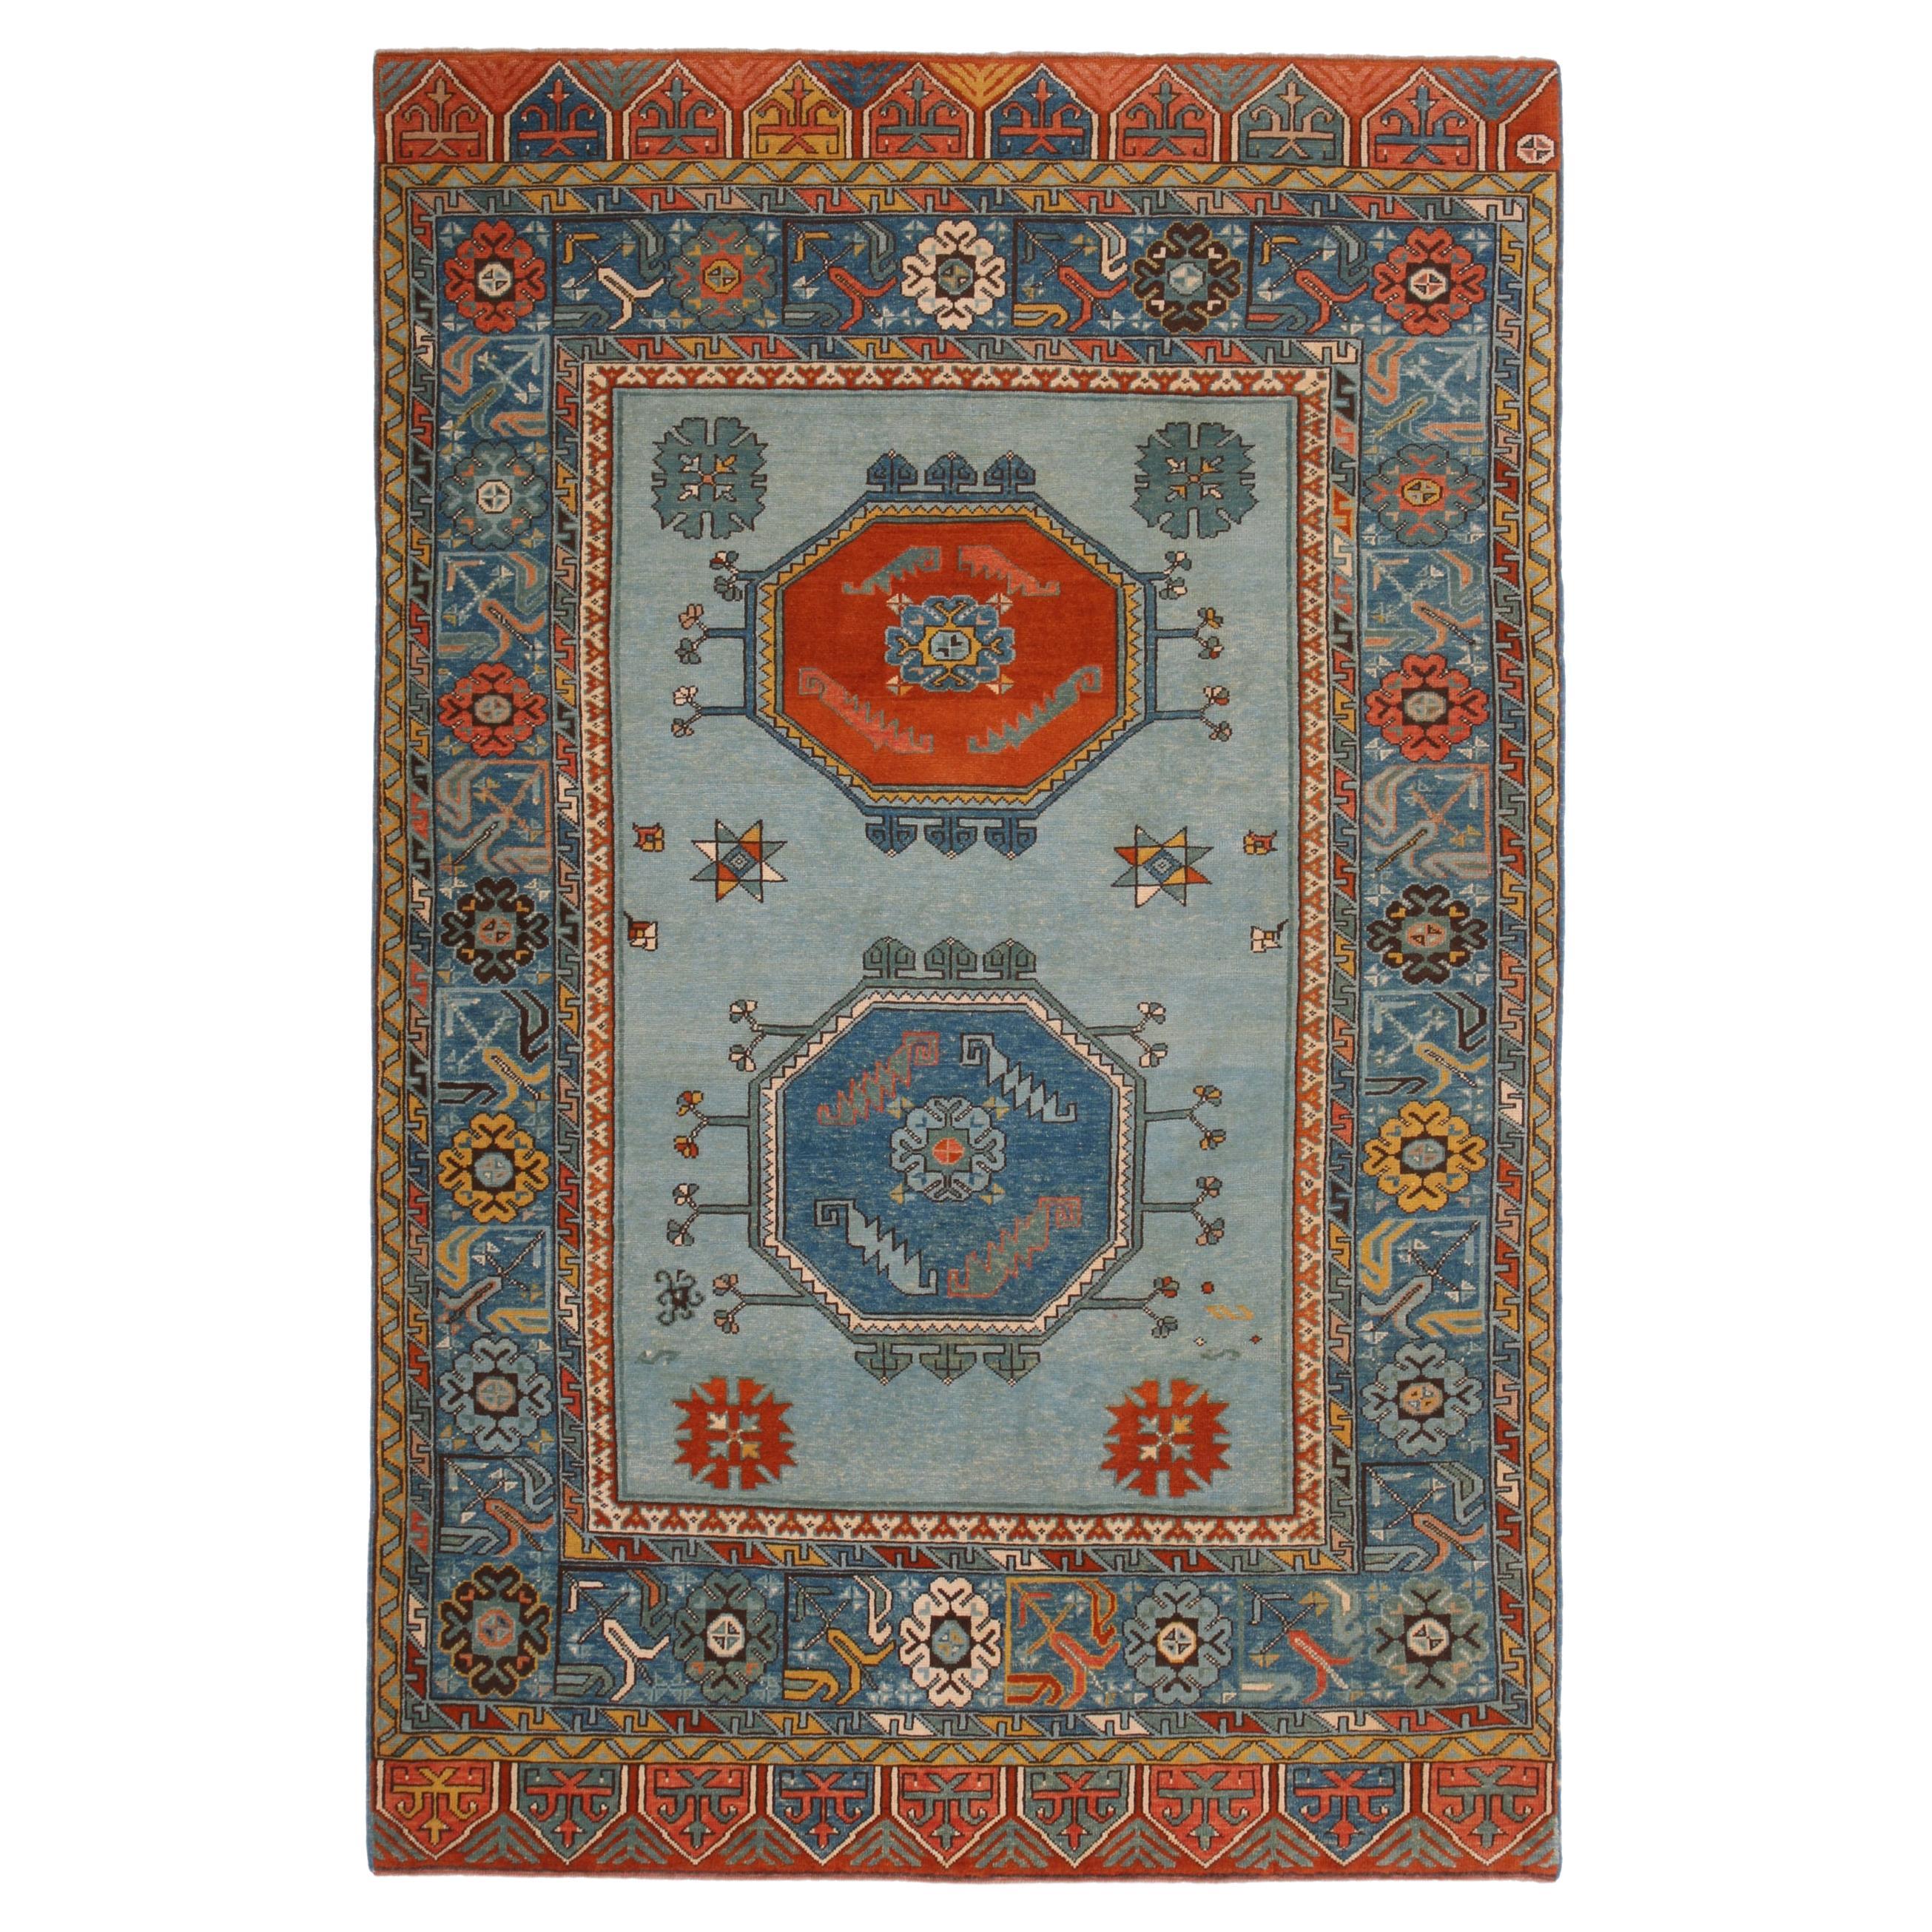 Ararat Rugs Carpet with Two Medallions 18th Century Revival Rug Natural Dyed